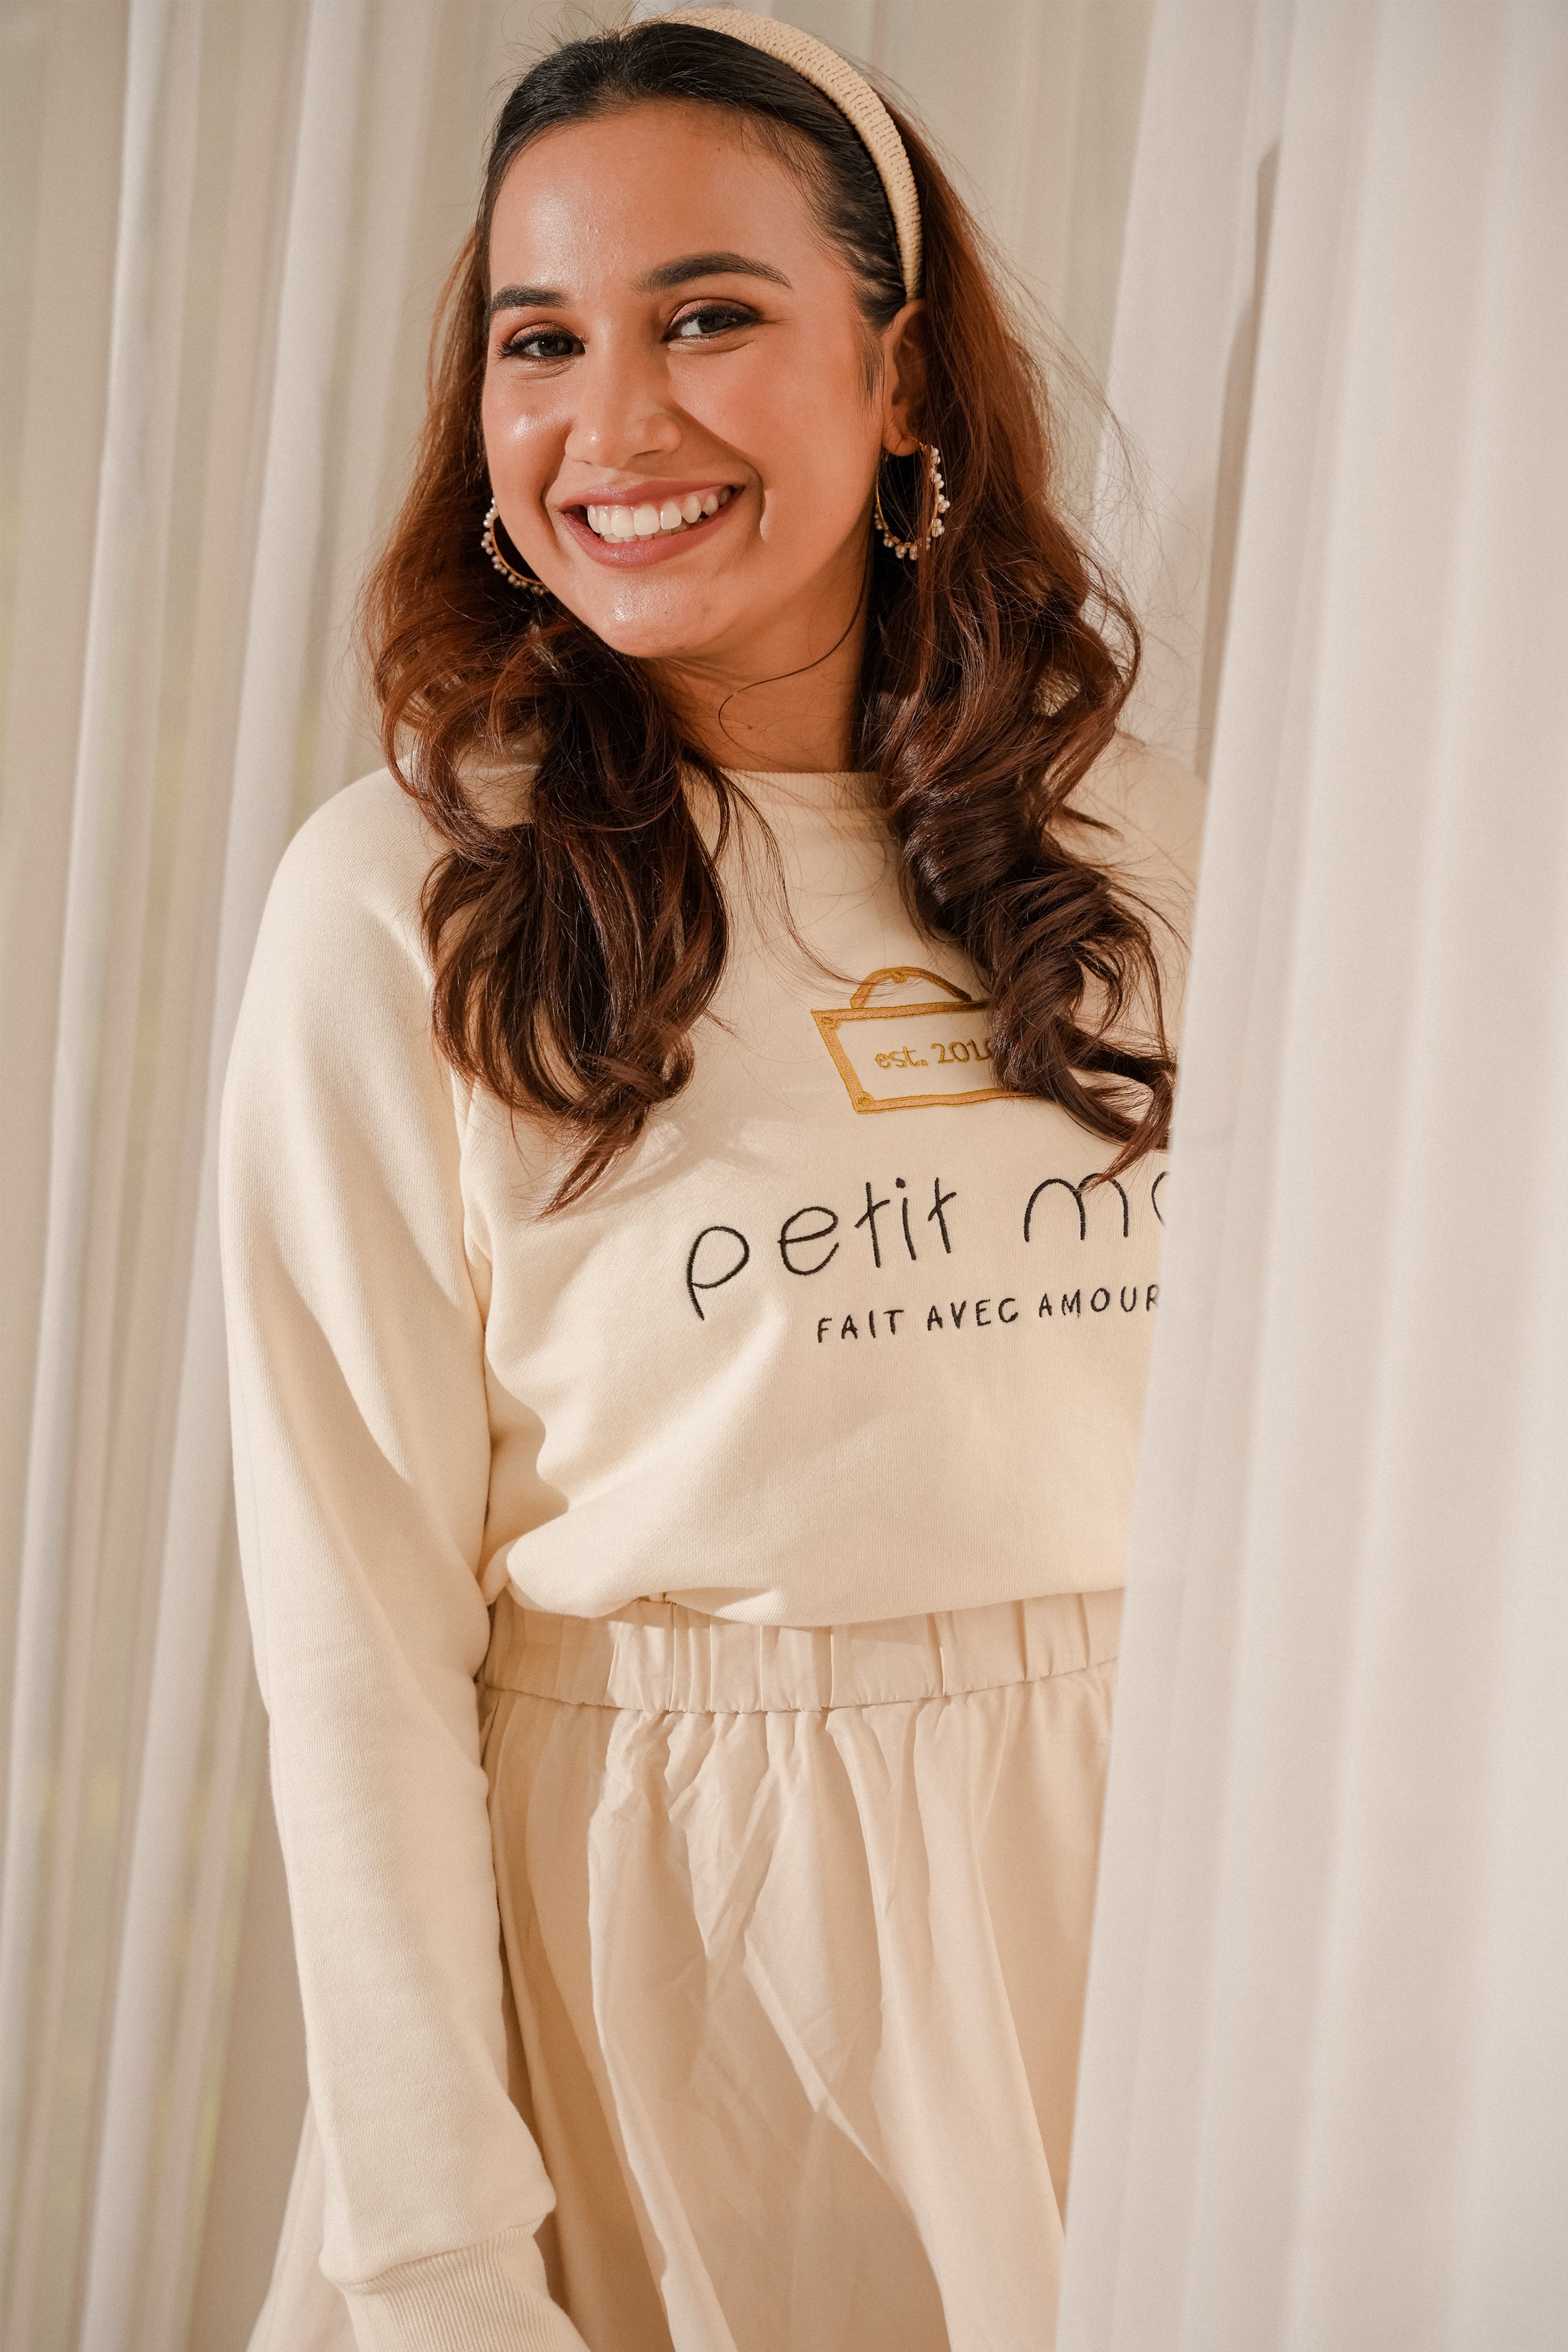 female model happily smiling in her new high quality jumper made by petit moi